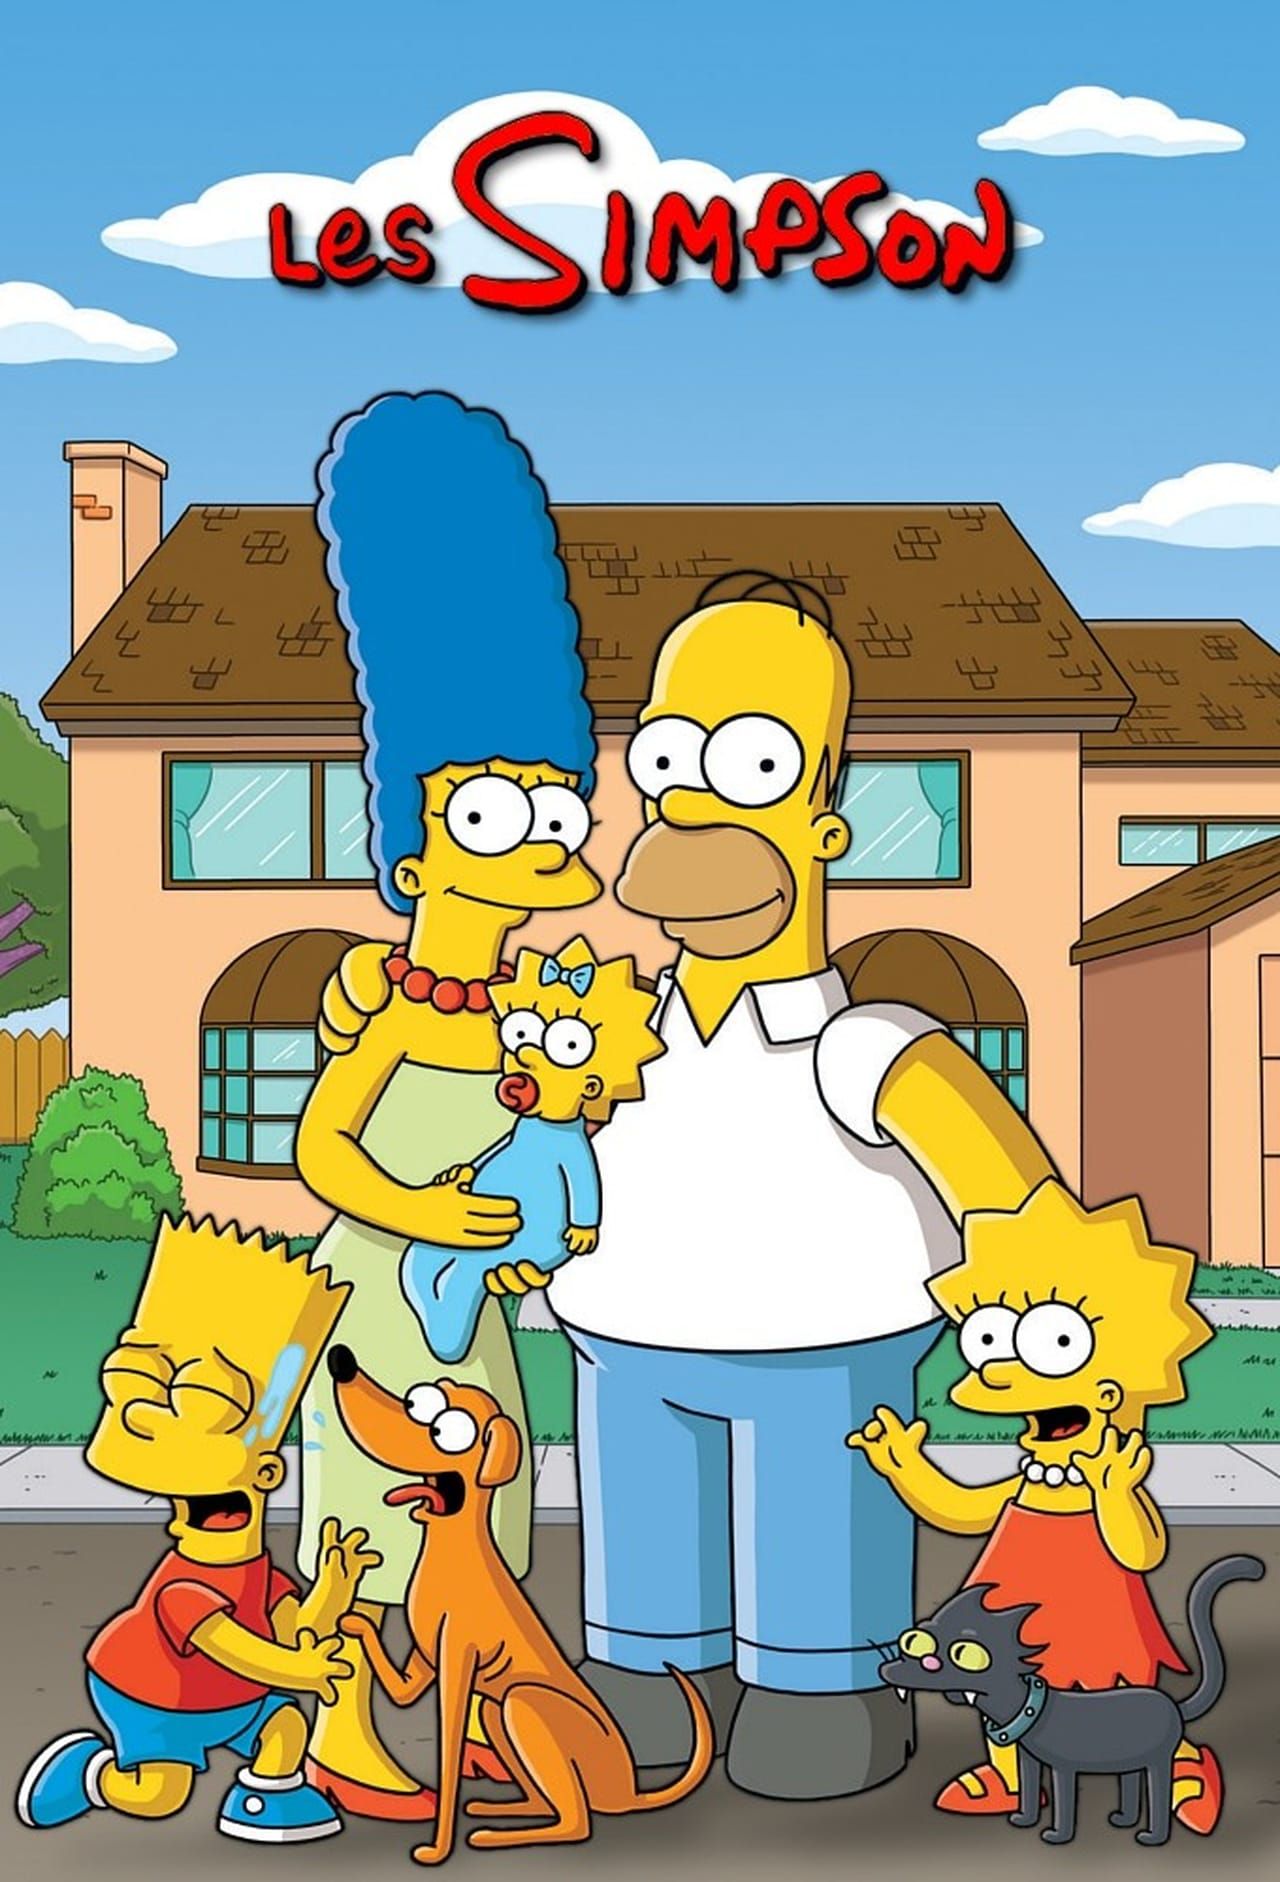 The Simpsons cover vertical TLDR